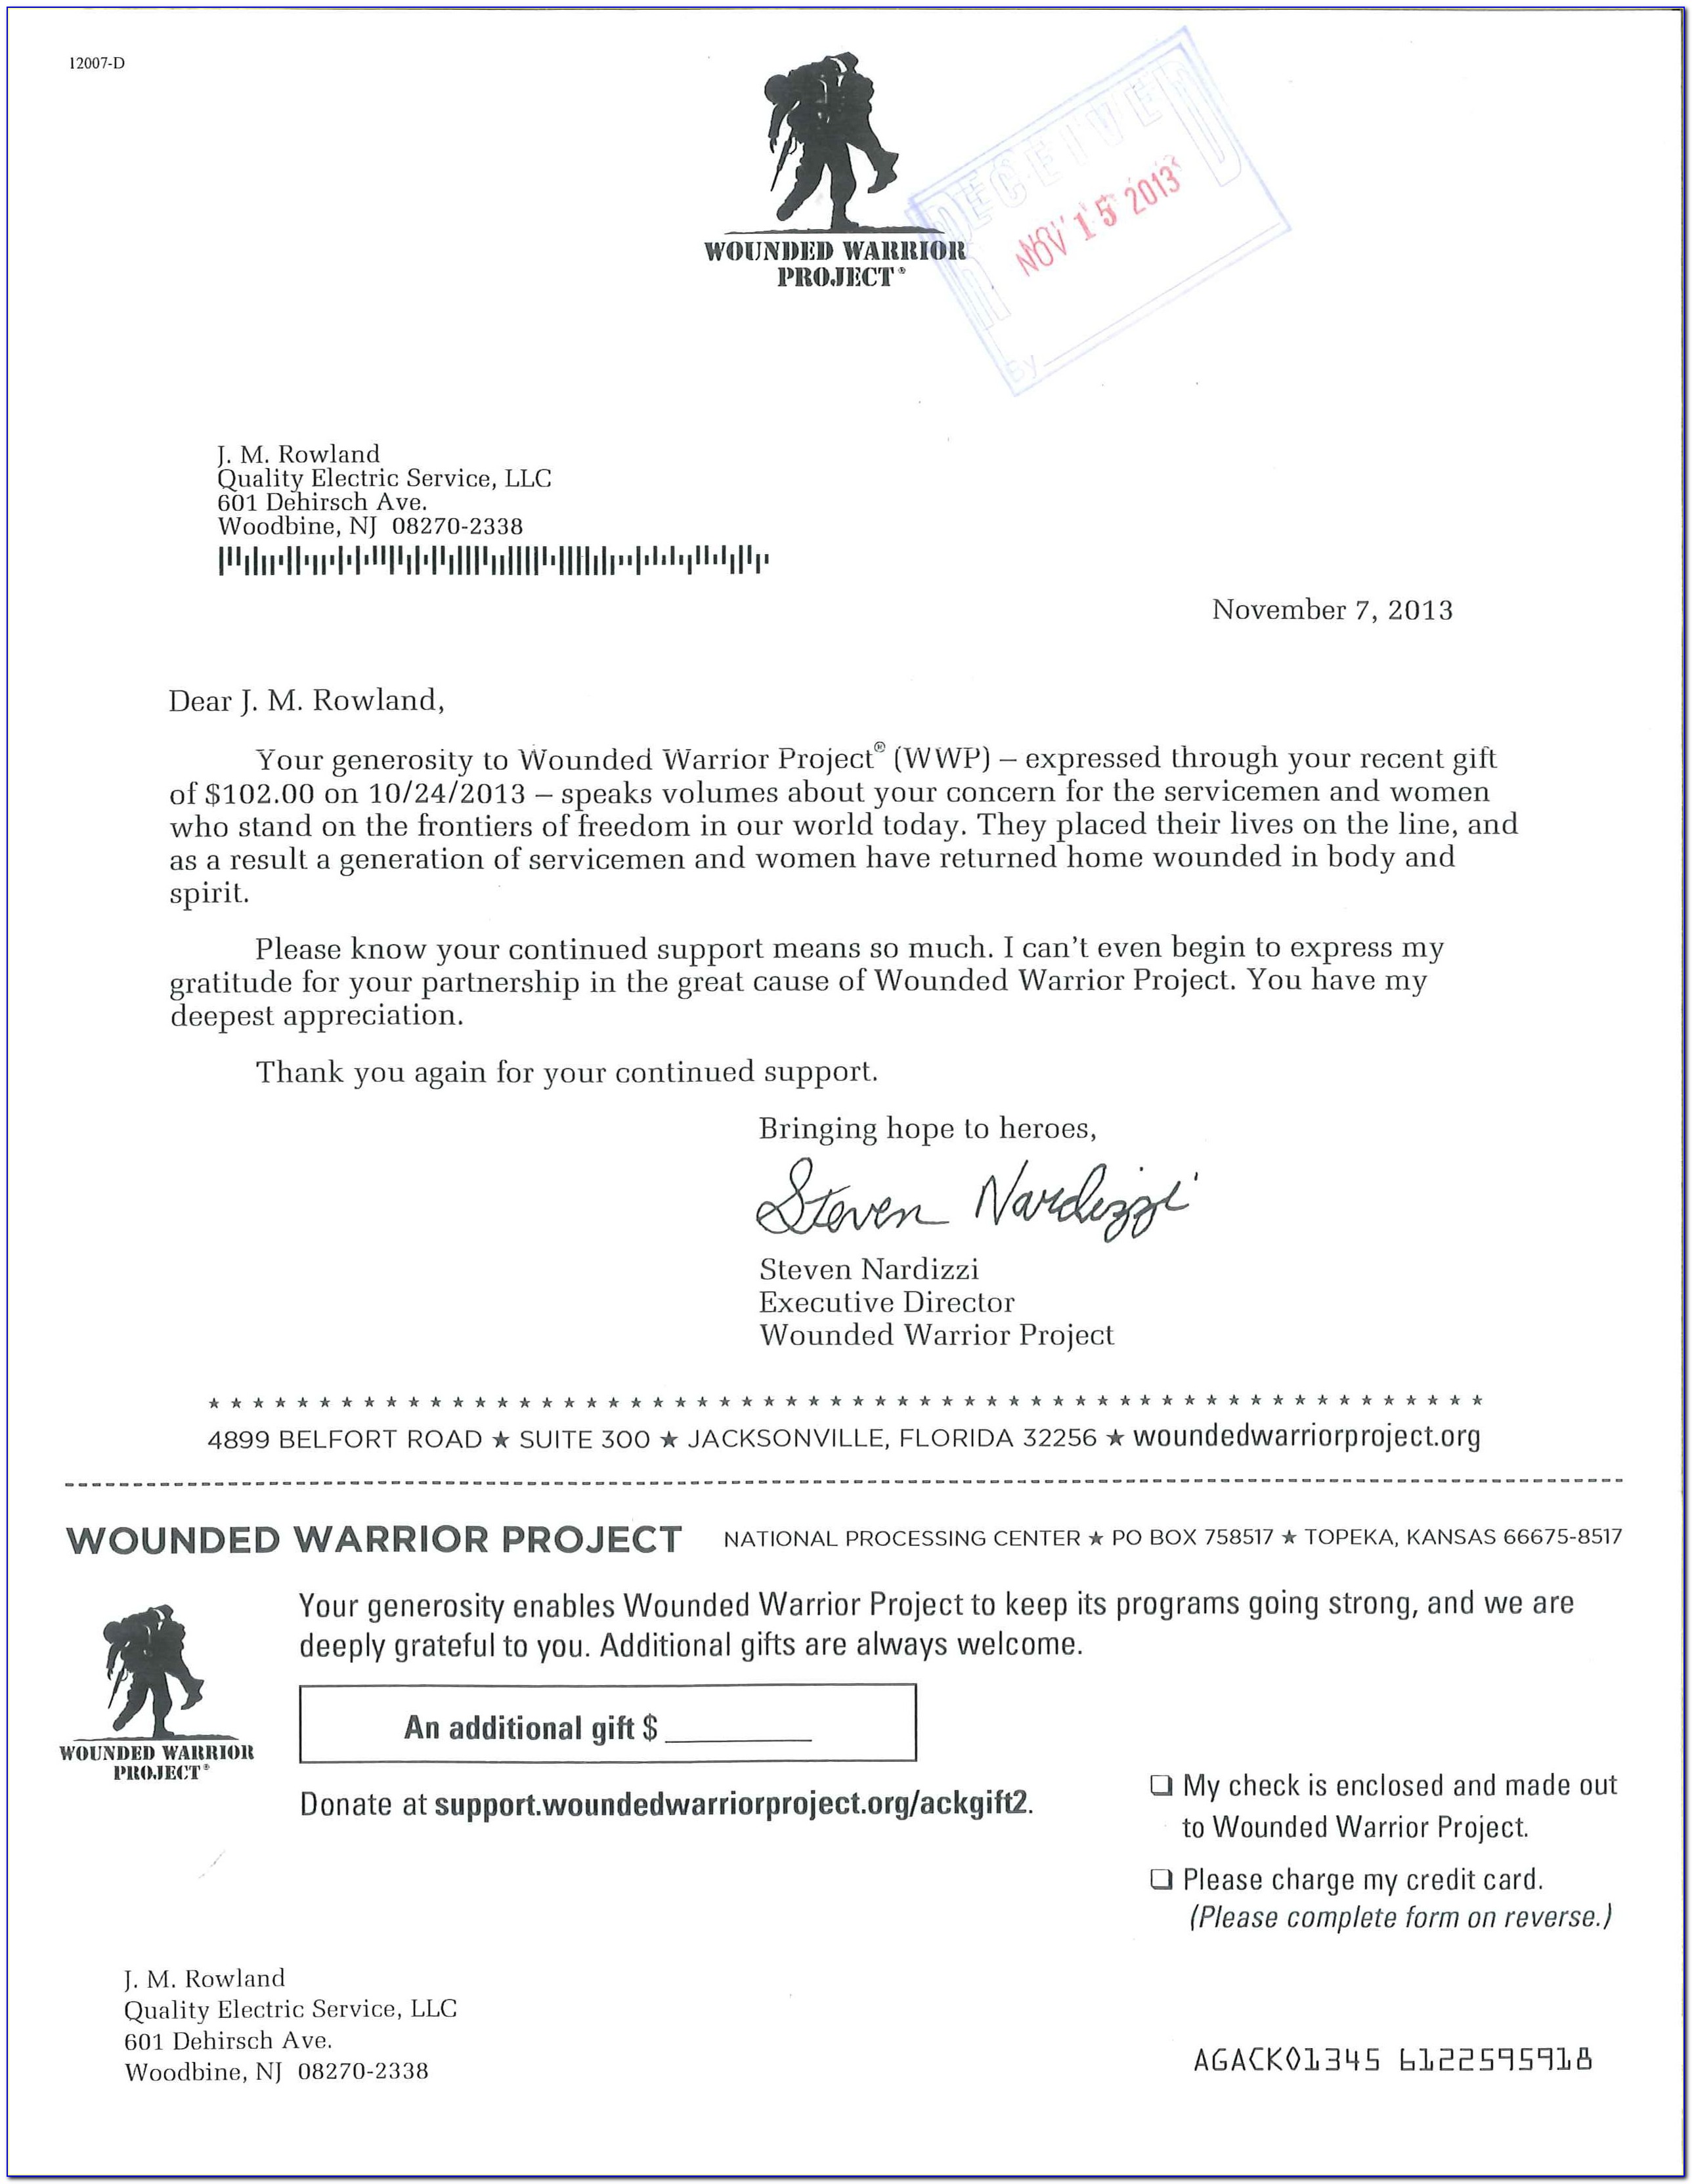 Wounded Warrior Project Online Donation Form